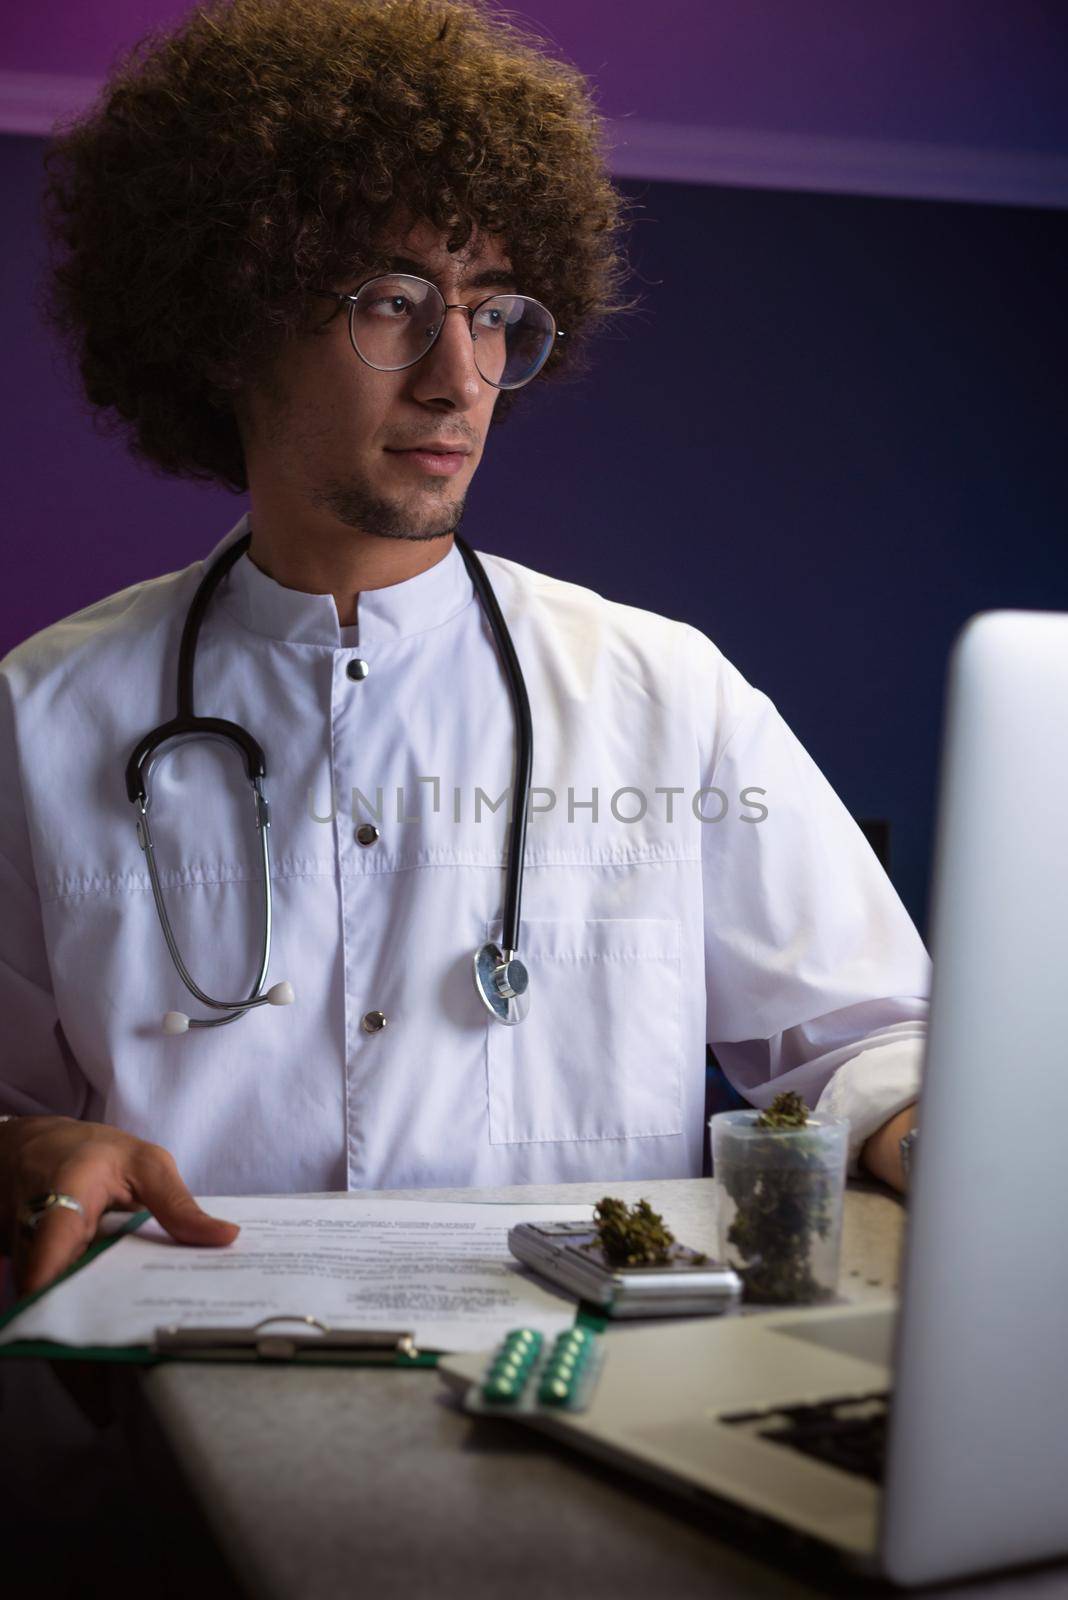 an Arab student with an Afro hairstyle in a doctor's suit is engaged in cannabis research by Rotozey